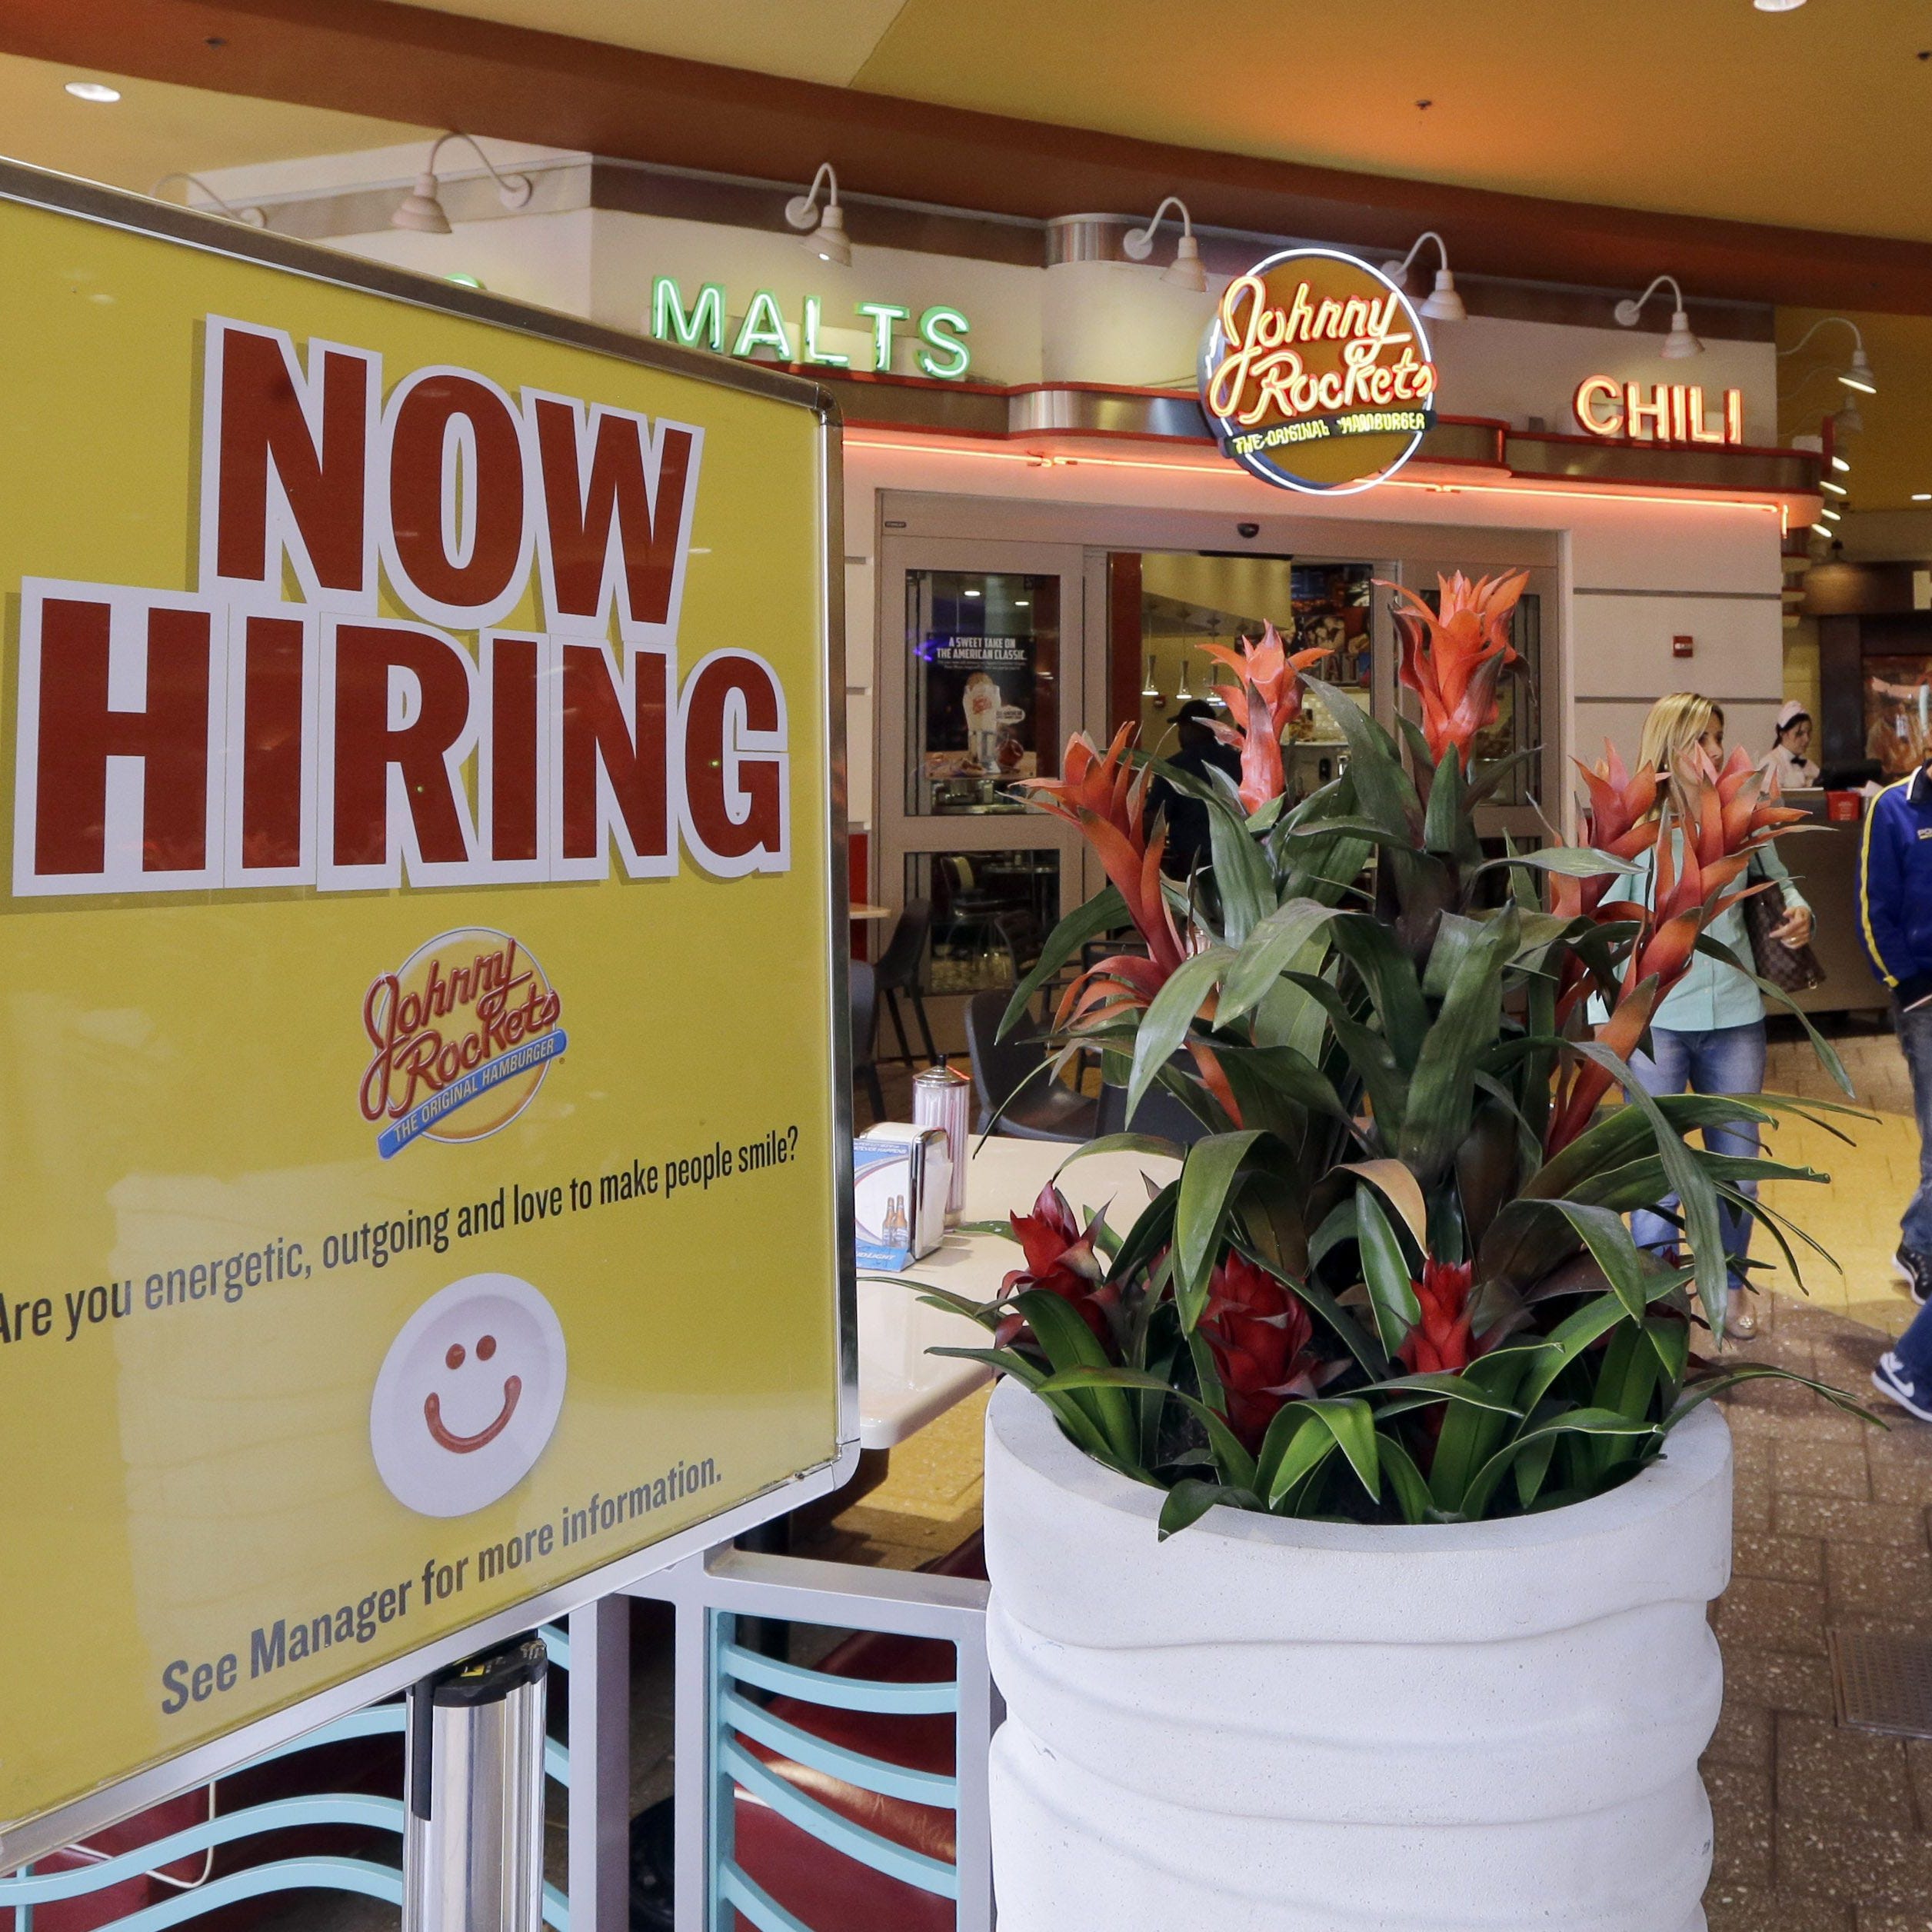 In another sign of a strong labor market, jobless claims fell to a 44-year low last week.